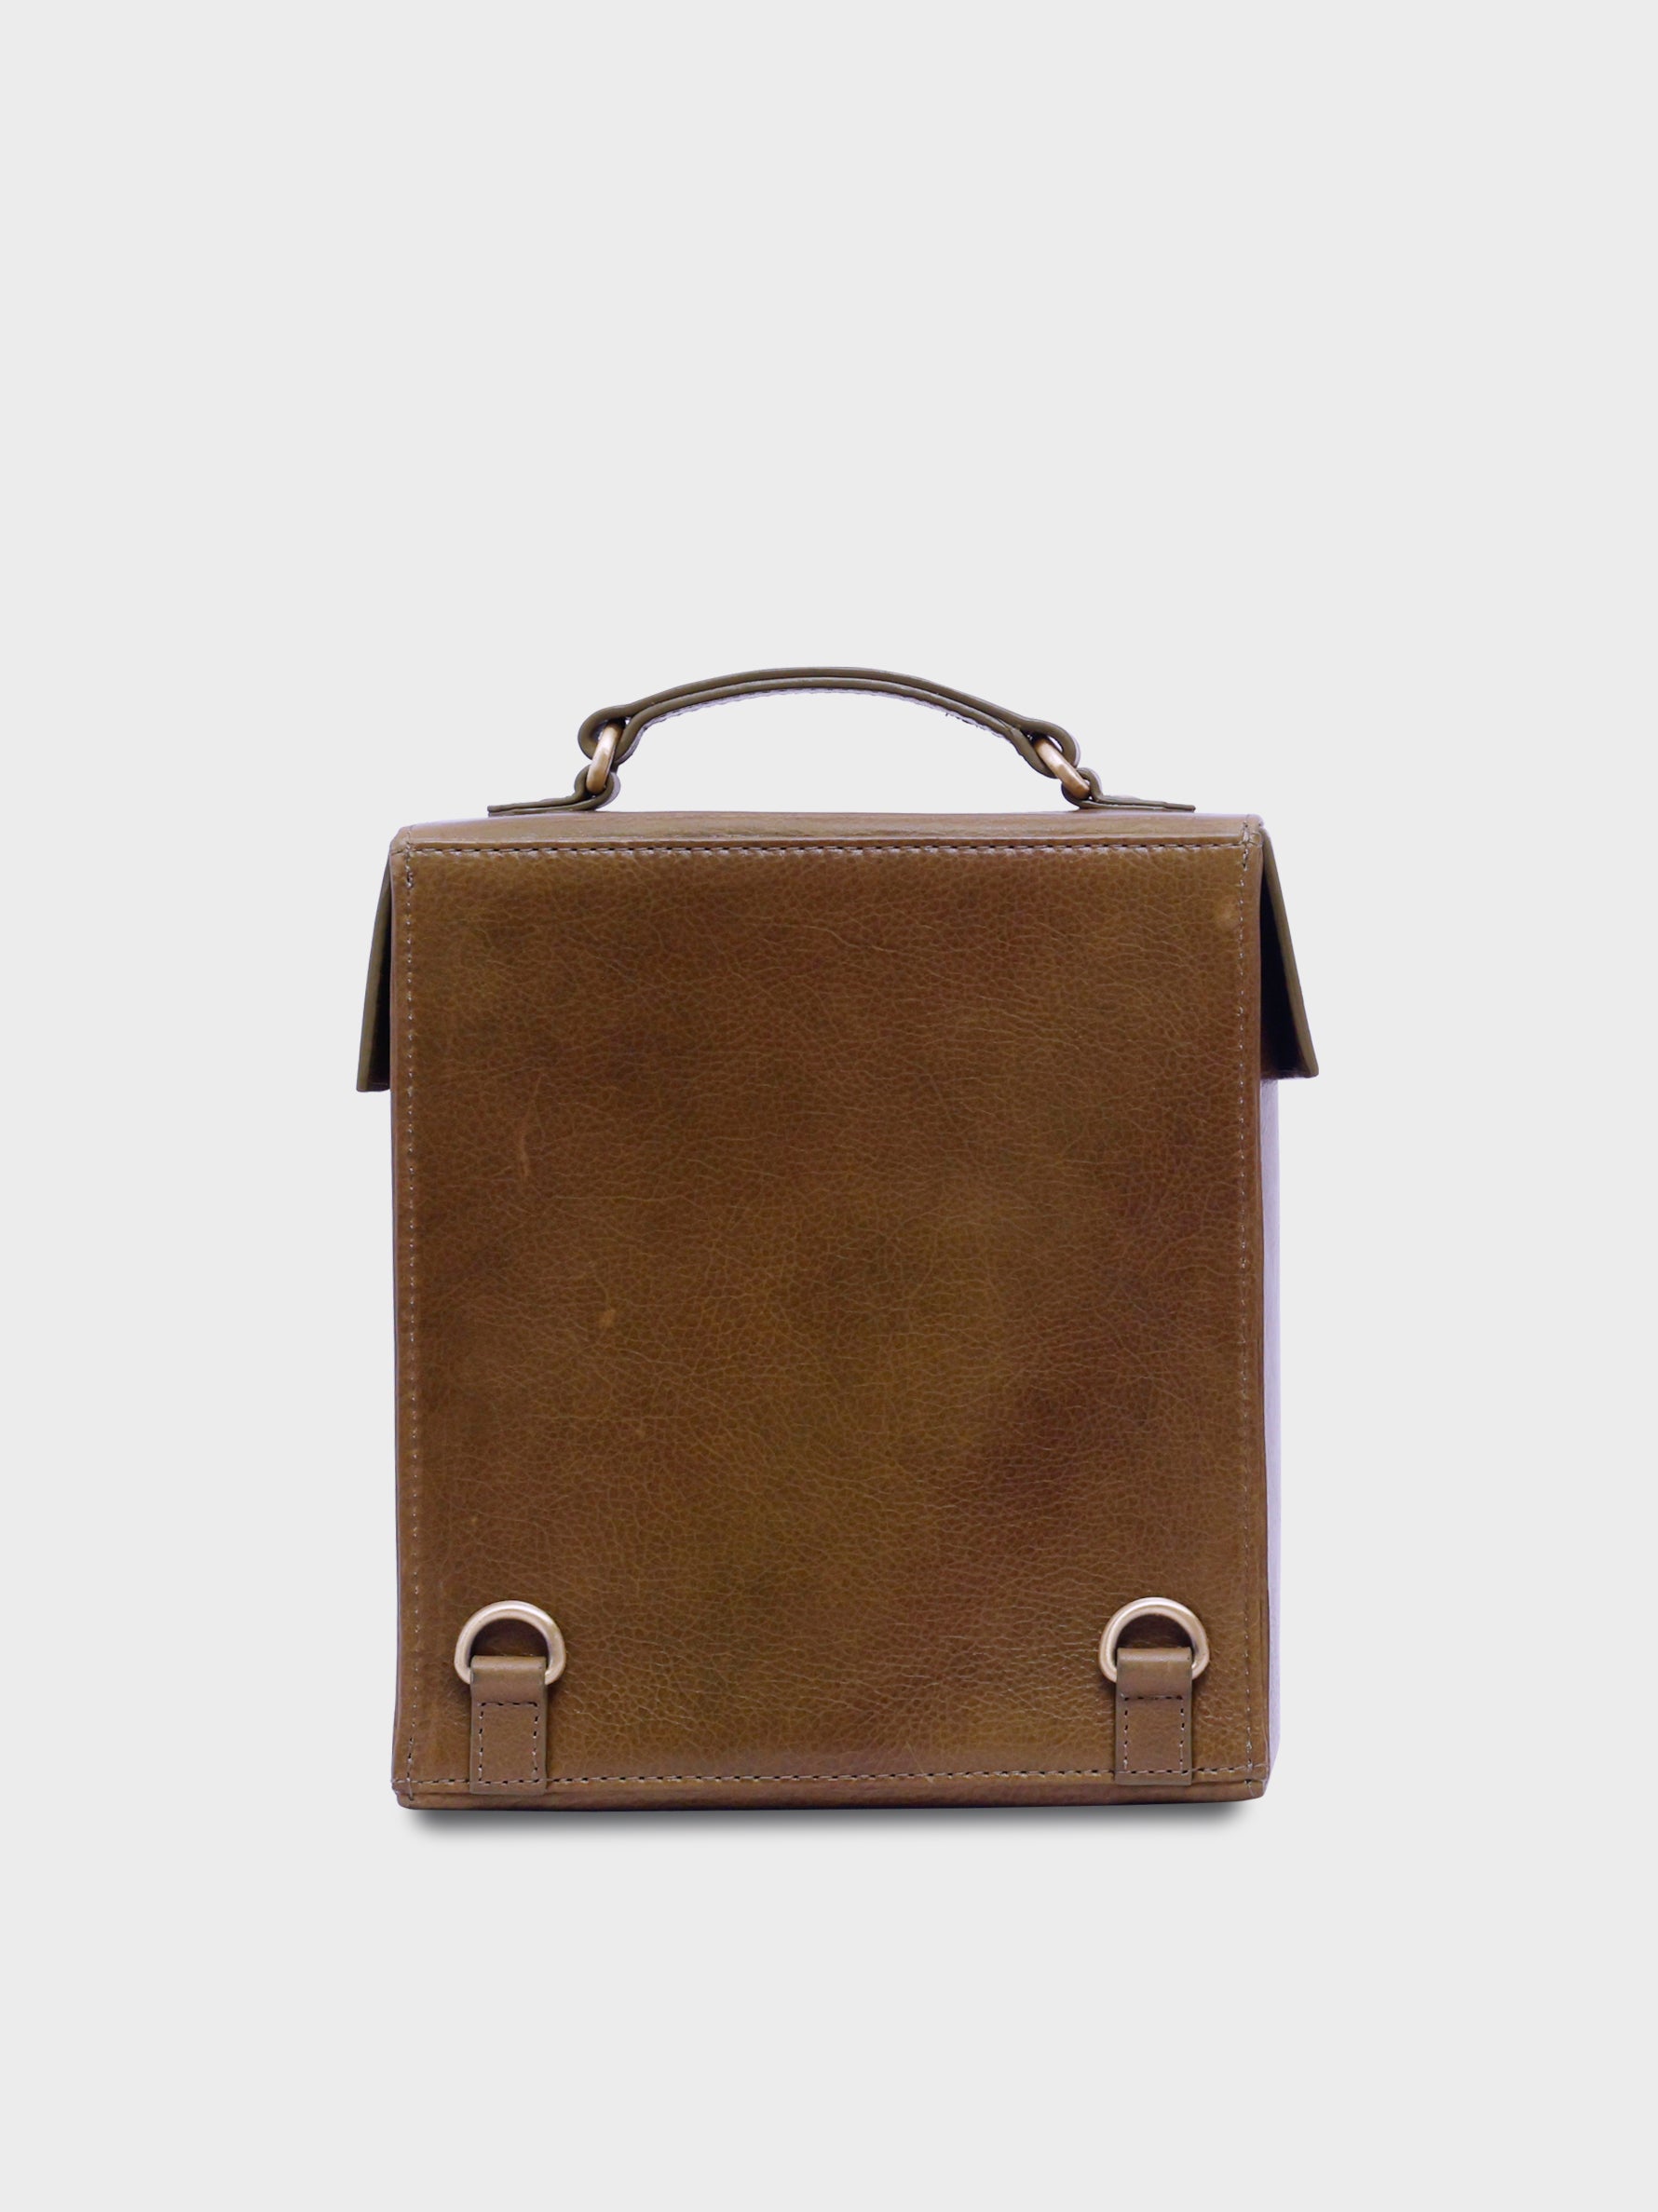 Handcrafted Genuine Vegetable Tanned Leather Letter Box Backpack Olive Green for Women Tan & Loom